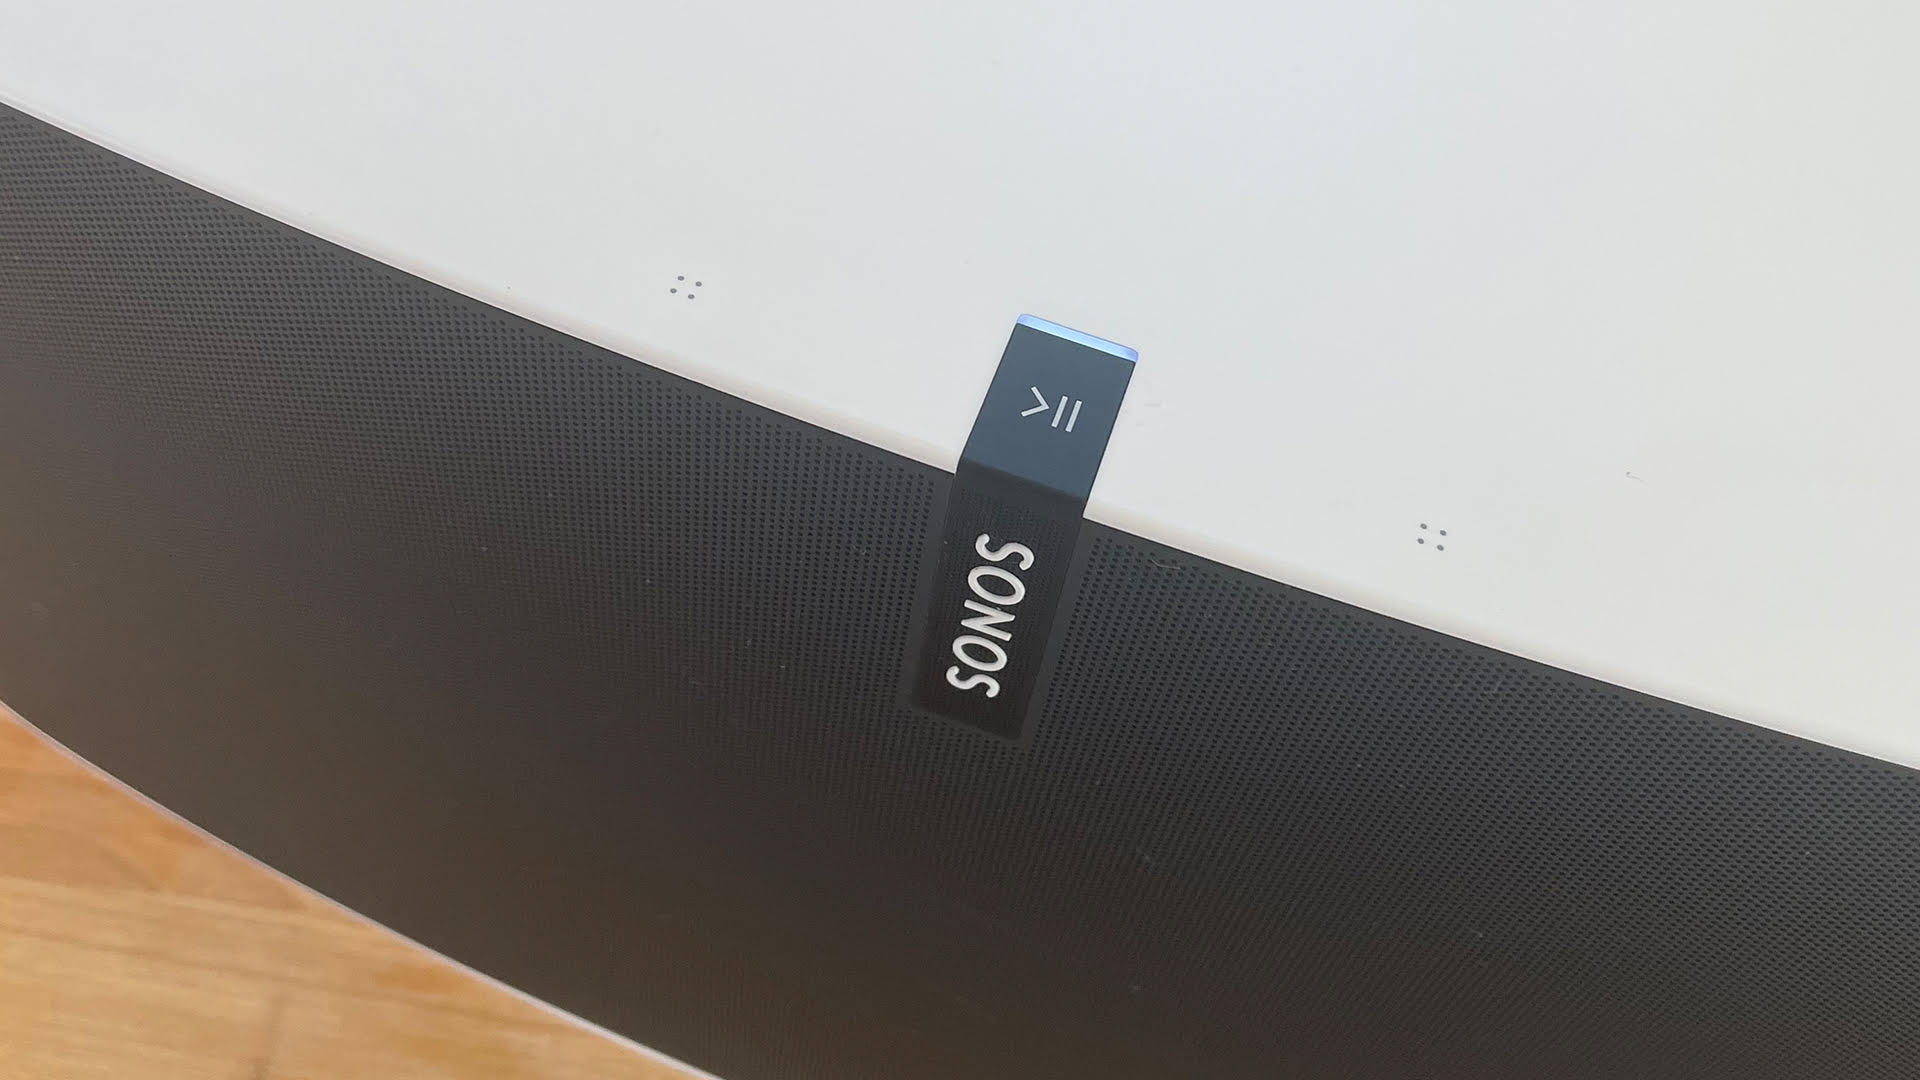 Shows Sonos Play:5 touch controls and status lights